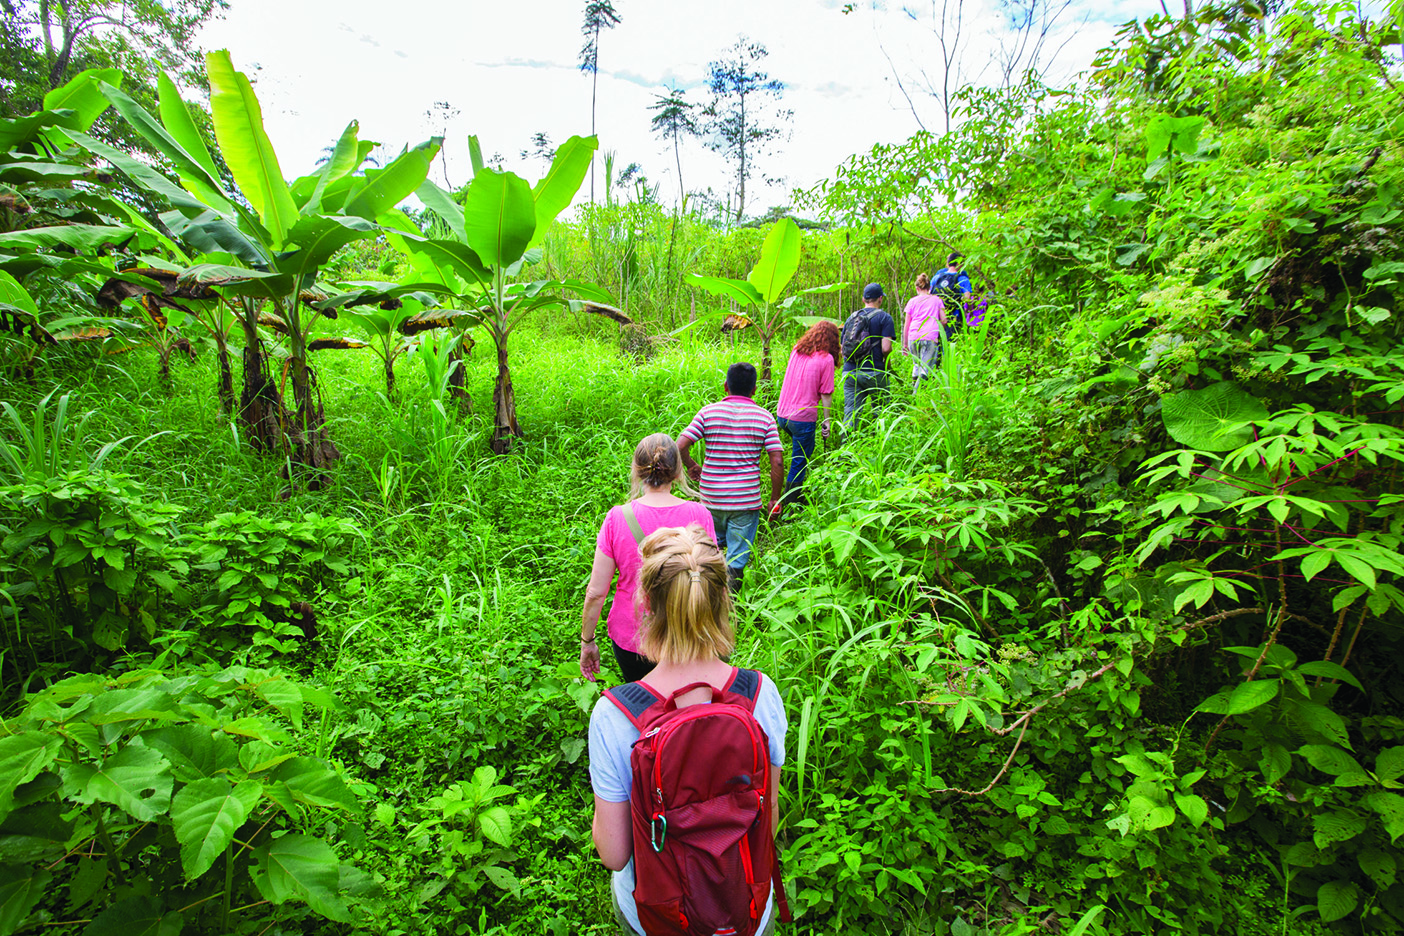 In a line, students hike up a trail in the Amazon